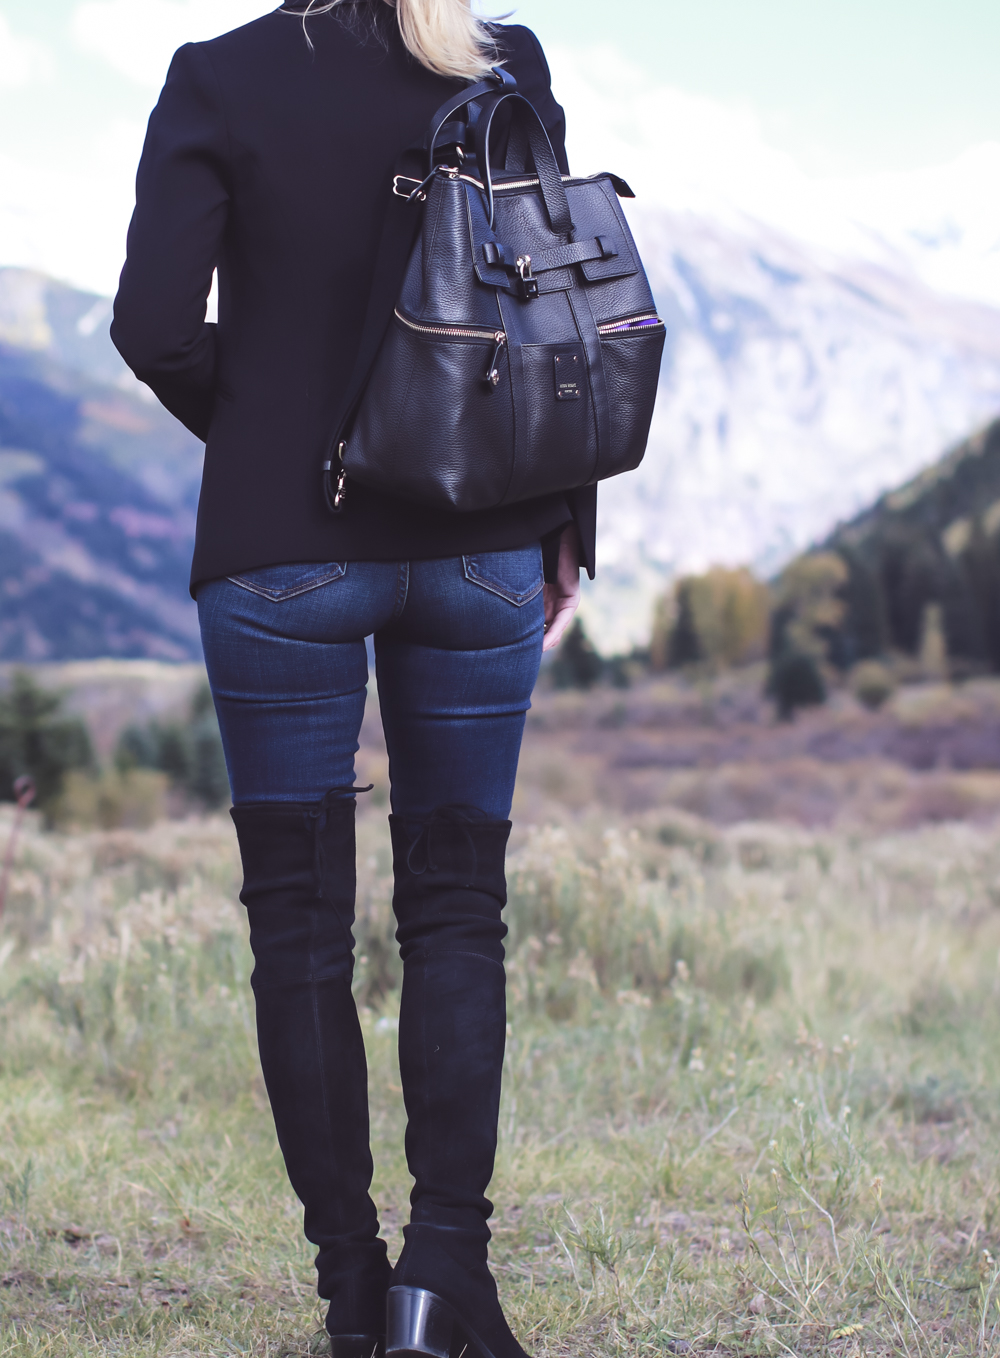 Tall Boots, over the knee boots, how to wear otk boots if you are tall or petite, featuring fashion blogger, Erin Busbee of Busbee Style in Telluride, Colorado, wearing Stuart Weitzman lowland boots , carrying Henri Bendel Jetsetter backpack